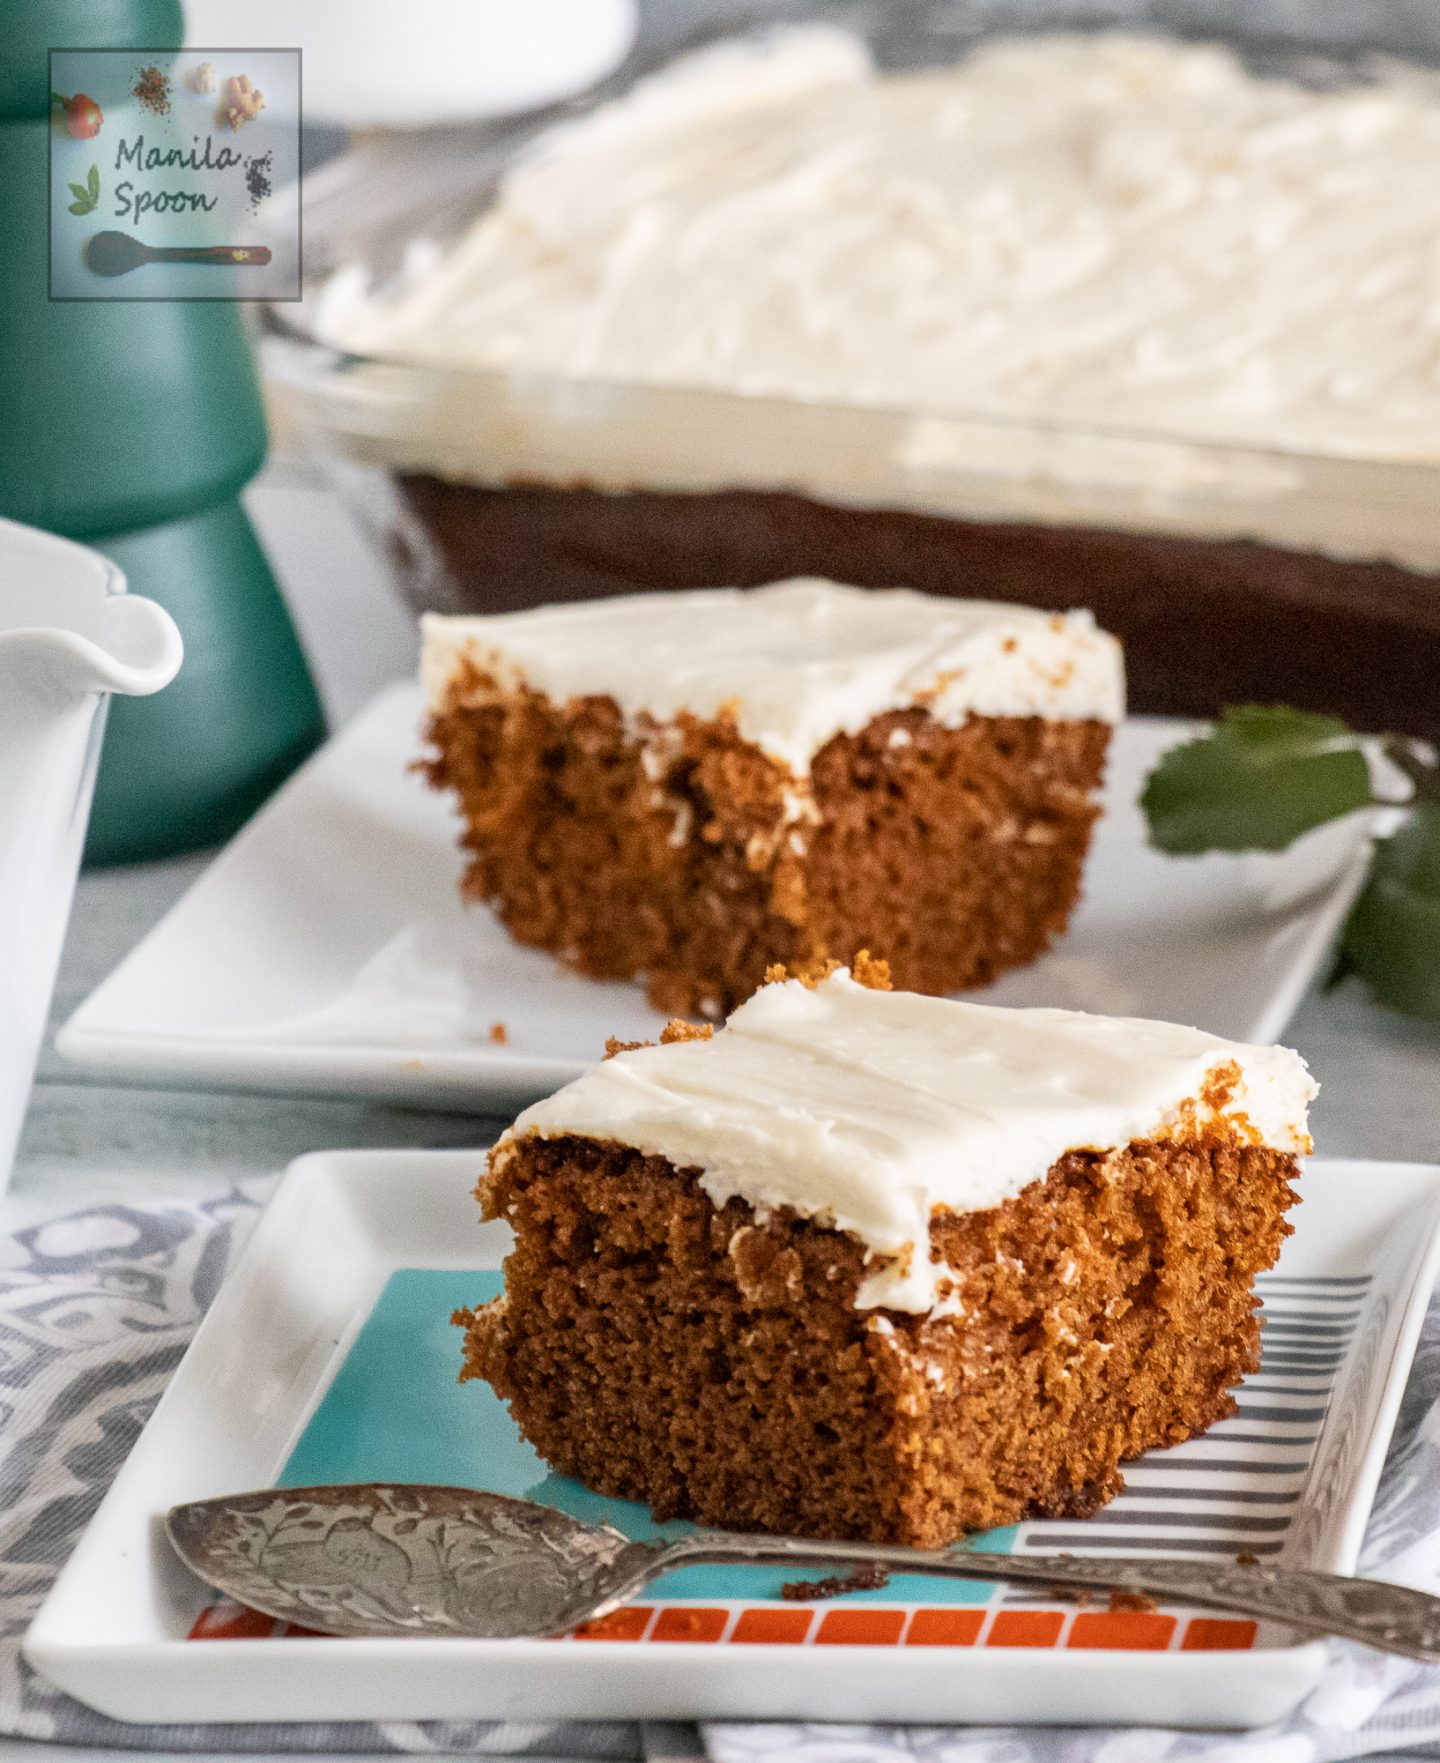 Perfectly spiced and deliciously moist, one slice is never enough for this Ginger and Molasses Cake! The cream cheese frosting brings this cake over the top! A must-make, holiday season or not!